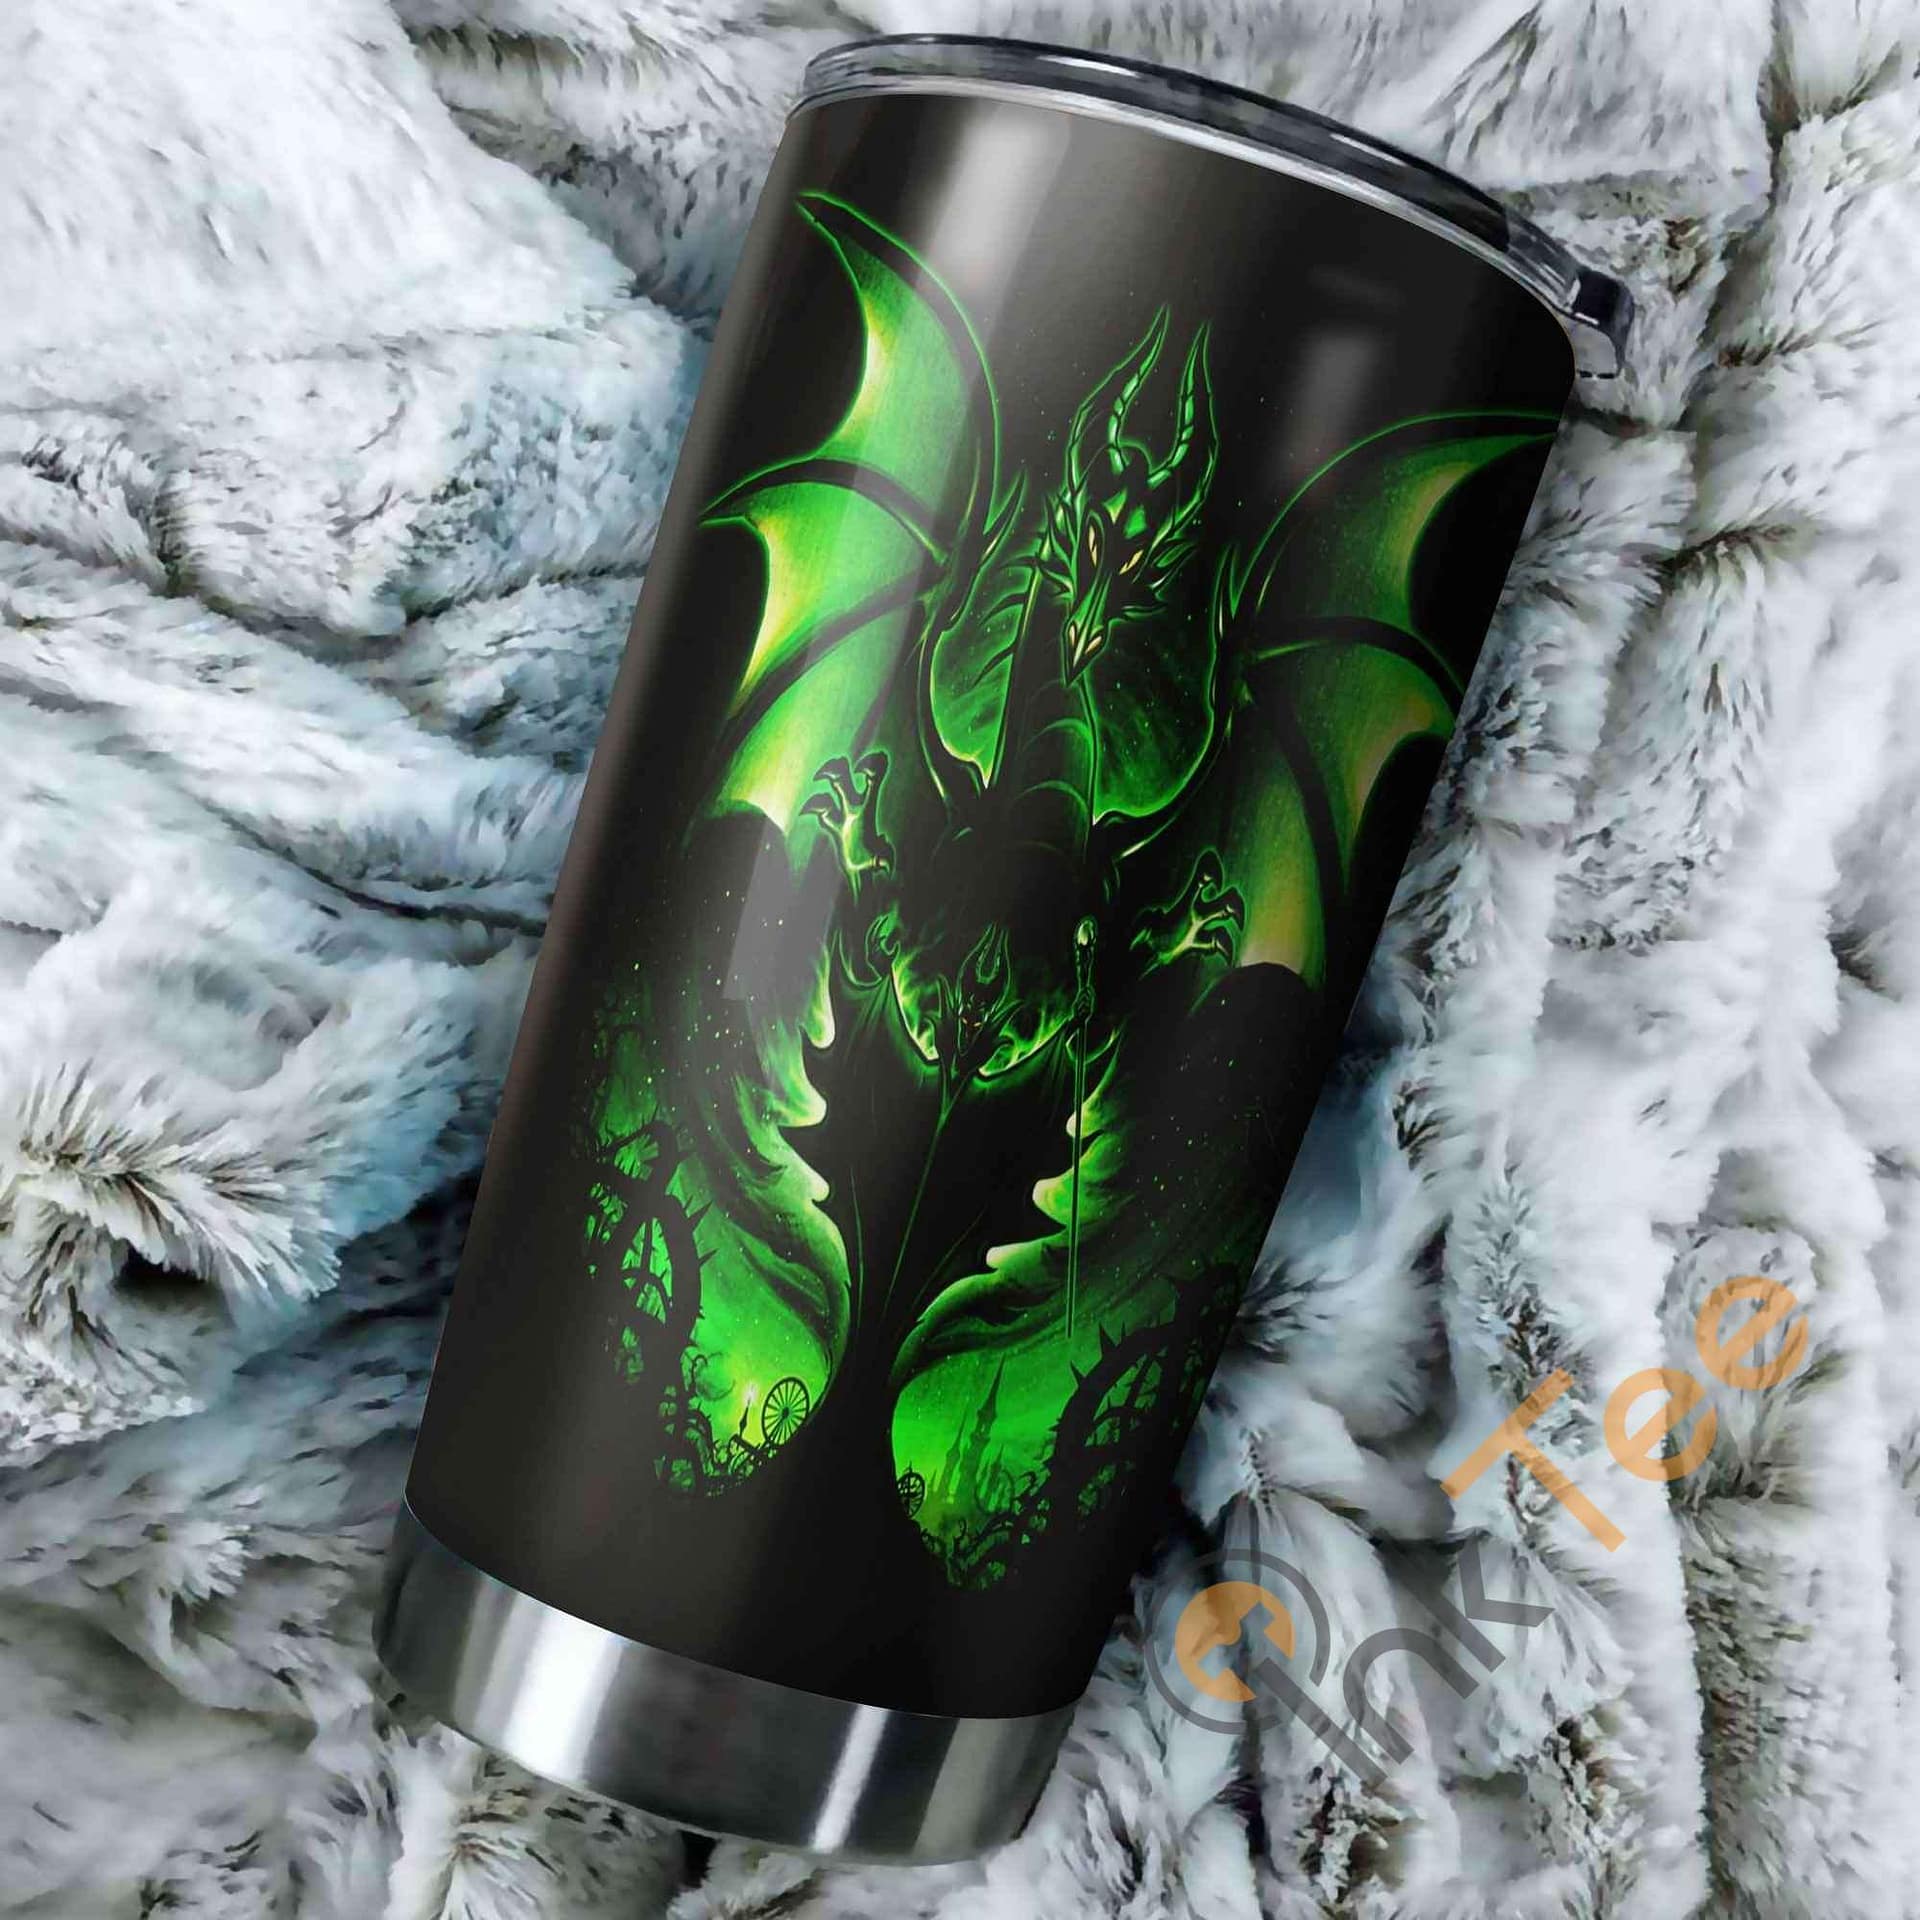 Maleficent 3D Perfect Gift Stainless Steel Tumbler